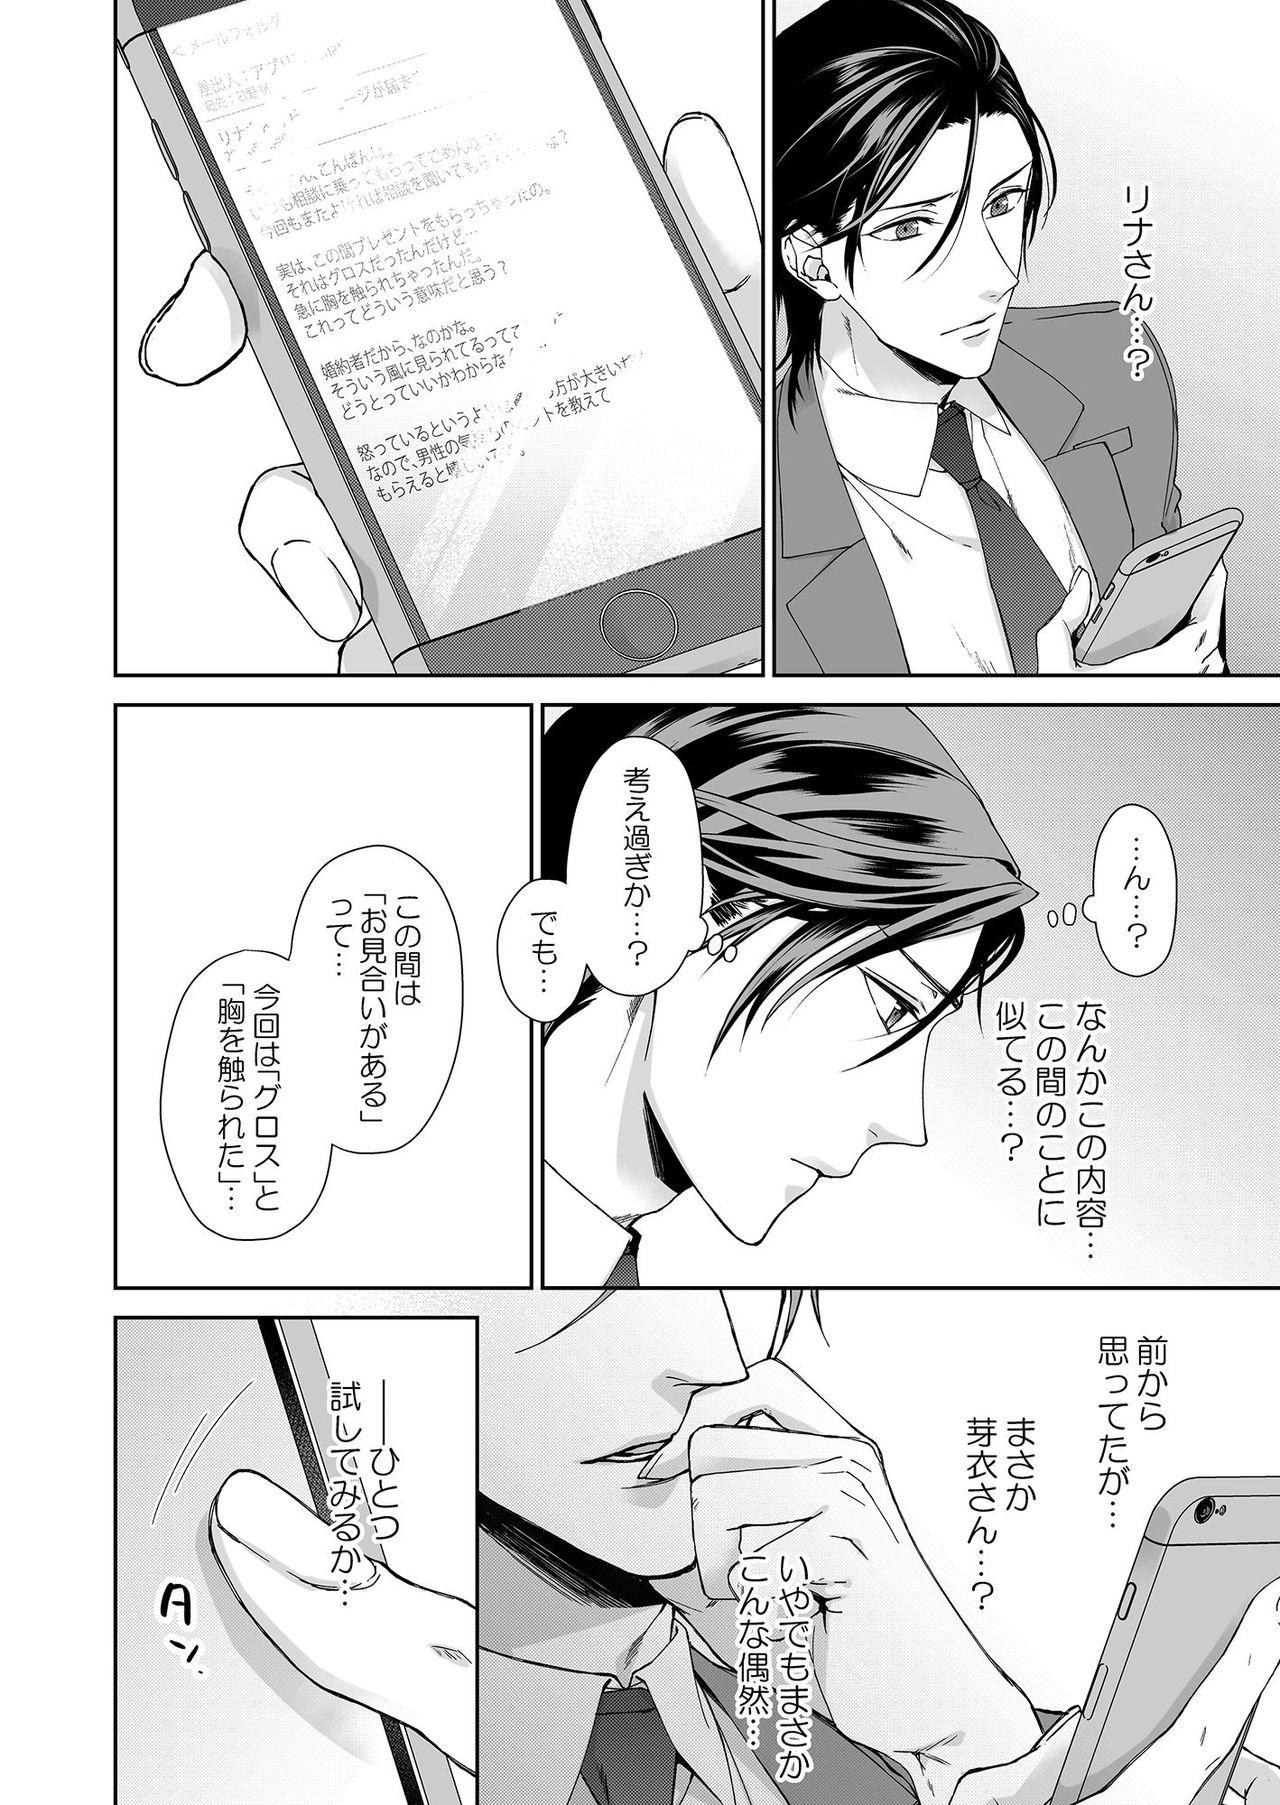 Clip 俺のためだけに鳴いて？ 第3-11話 Double Penetration - Page 12